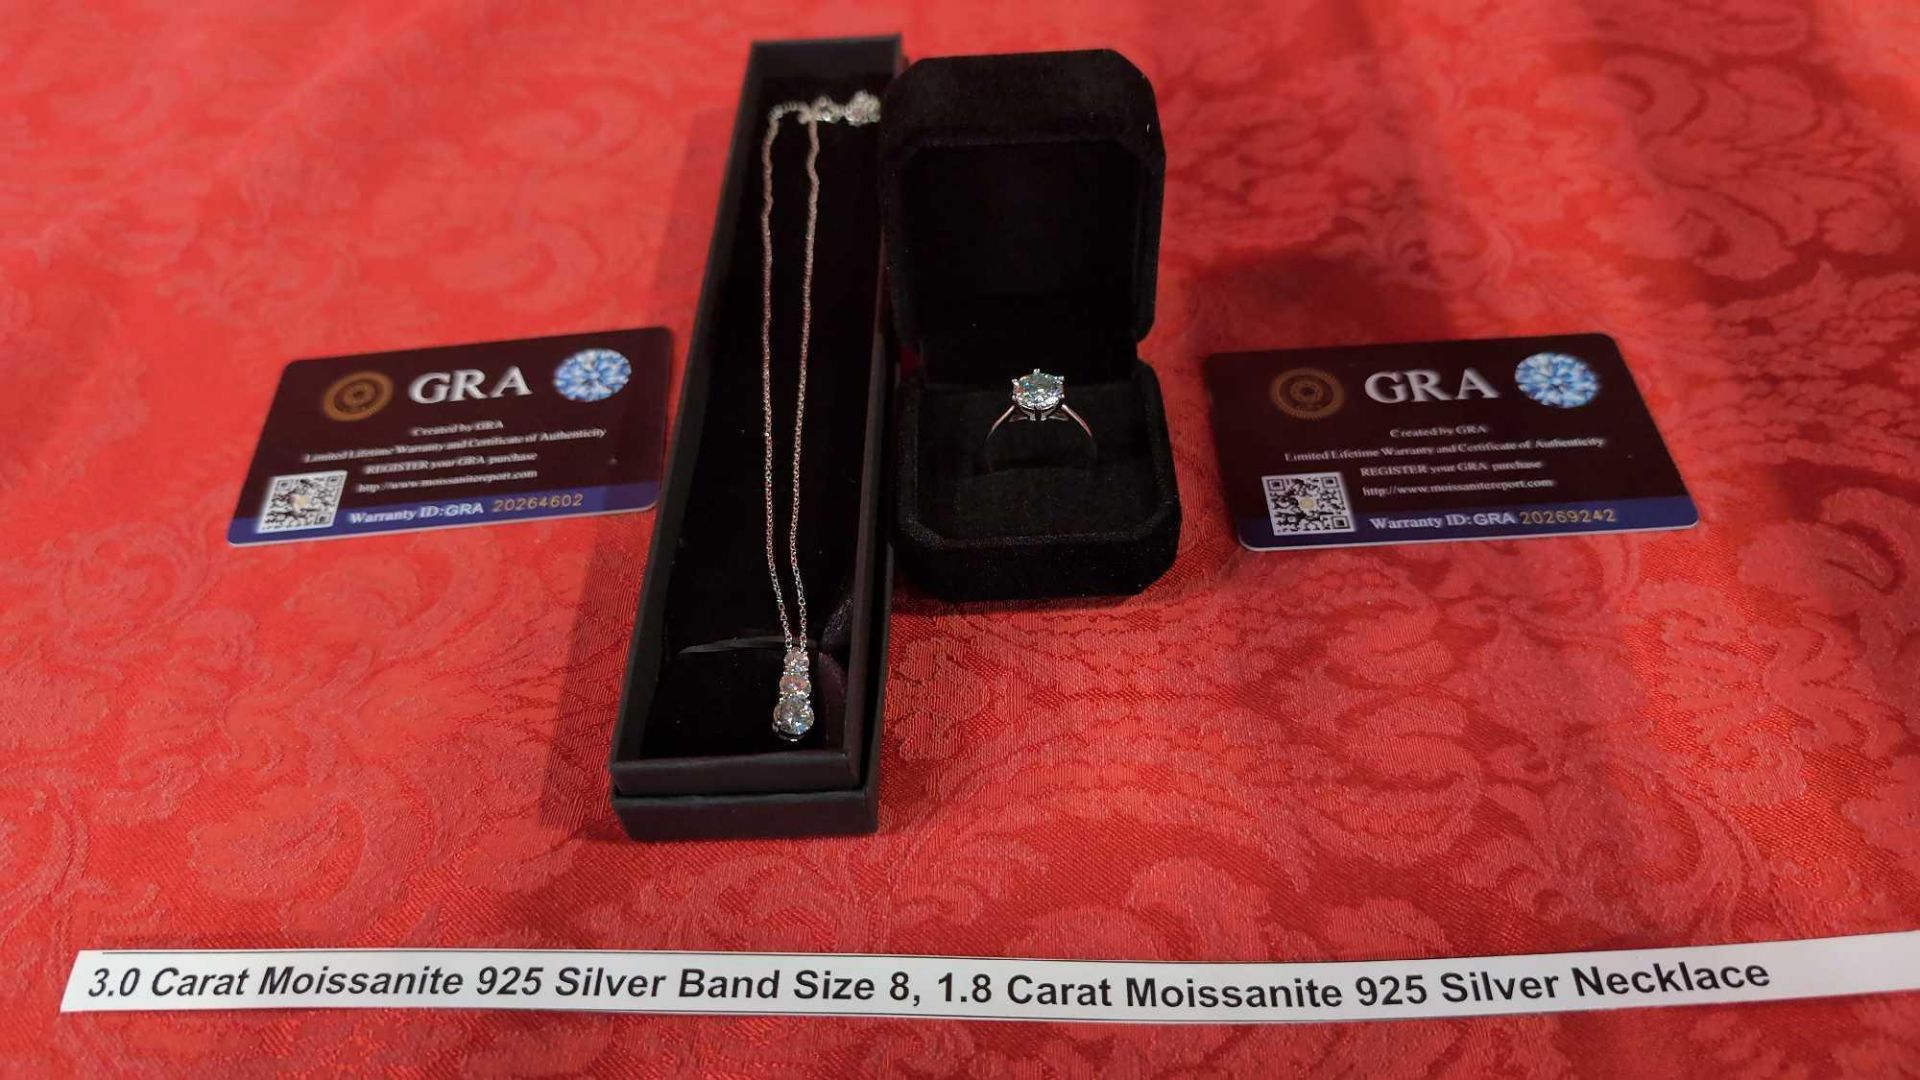 3 Carat Moissanite Silver band 8 and 1.8 Carat Moissanite Silver Necklace - Image 7 of 7